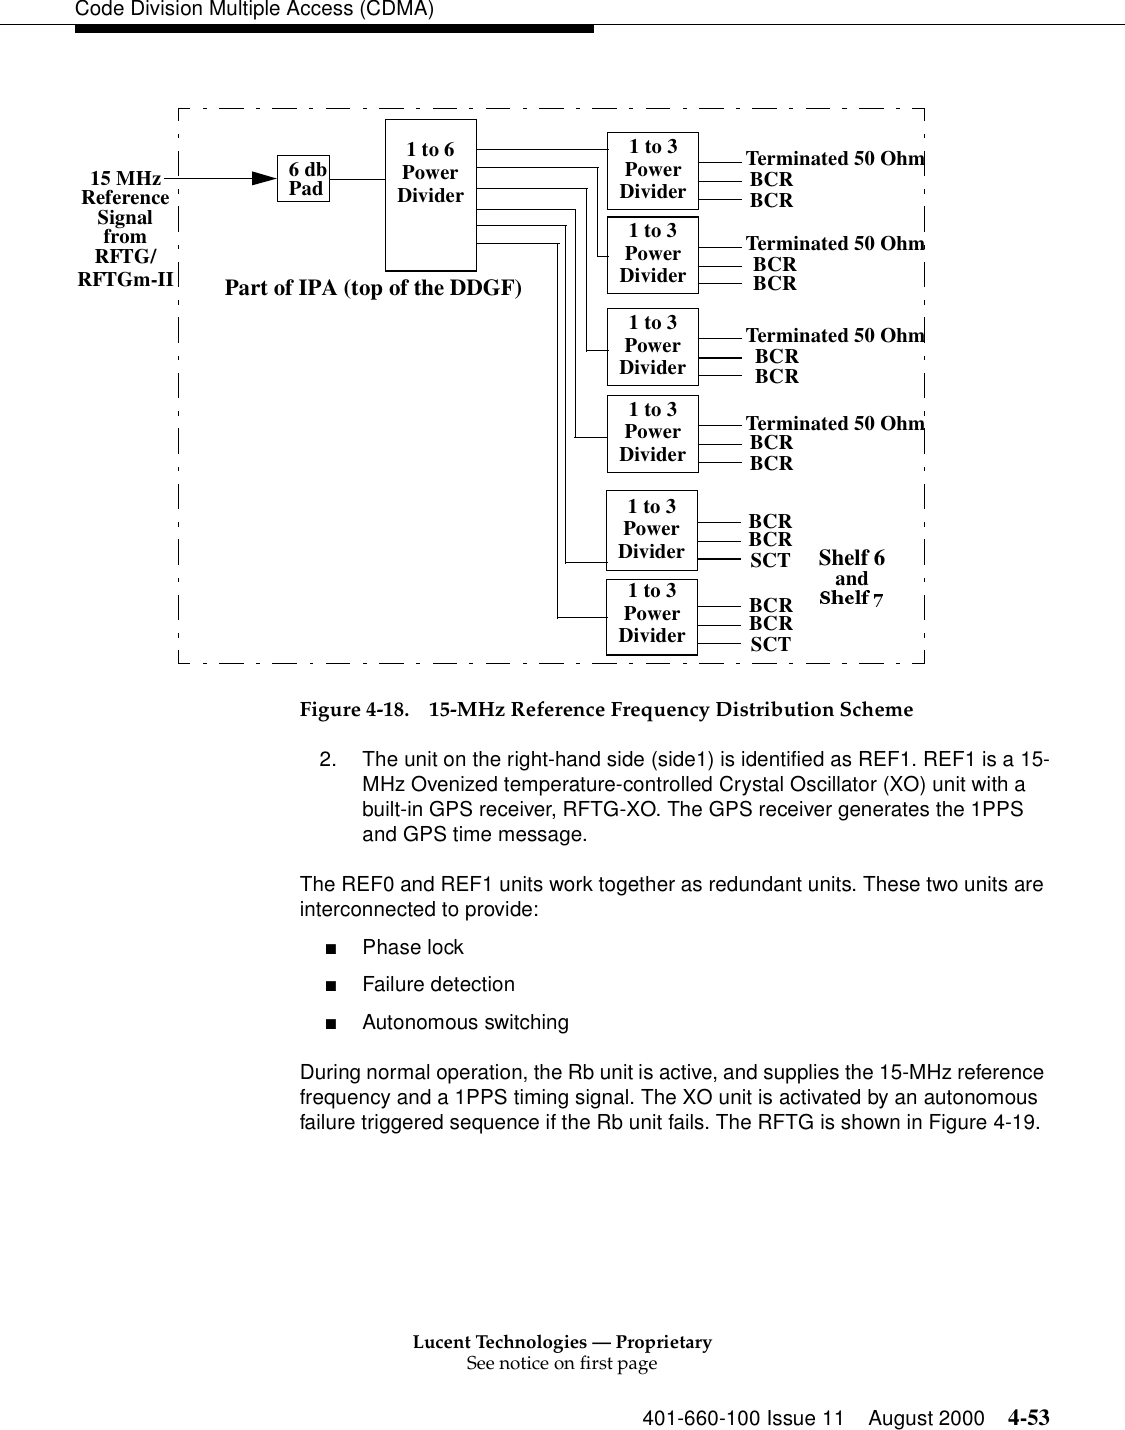 Lucent Technologies — ProprietarySee notice on first page401-660-100 Issue 11 August 2000 4-53Code Division Multiple Access (CDMA)Figure 4-18. 15-MHz Reference Frequency Distribution Scheme2. The unit on the right-hand side (side1) is identified as REF1. REF1 is a 15-MHz Ovenized temperature-controlled Crystal Oscillator (XO) unit with a built-in GPS receiver, RFTG-XO. The GPS receiver generates the 1PPS and GPS time message.The REF0 and REF1 units work together as redundant units. These two units are interconnected to provide:■Phase lock■Failure detection■Autonomous switchingDuring normal operation, the Rb unit is active, and supplies the 15-MHz reference frequency and a 1PPS timing signal. The XO unit is activated by an autonomous failure triggered sequence if the Rb unit fails. The RFTG is shown in Figure 4-19.1 to 6PowerDivider1 to 3PowerDividerBCRBCRSCT1 to 3PowerDividerBCRBCRSCT1 to 3PowerDivider BCRBCR1 to 3PowerDivider BCRBCR1 to 3PowerDividerTerminated 50 OhmTerminated 50 Ohm1 to 3PowerDividerTerminated 50 OhmTerminated 50 Ohm15 MHzReferenceSignalfromRFTG/6 dbPadShelf 6andPart of IPA (top of the DDGF)BCRBCRBCRBCRRFTGm-II